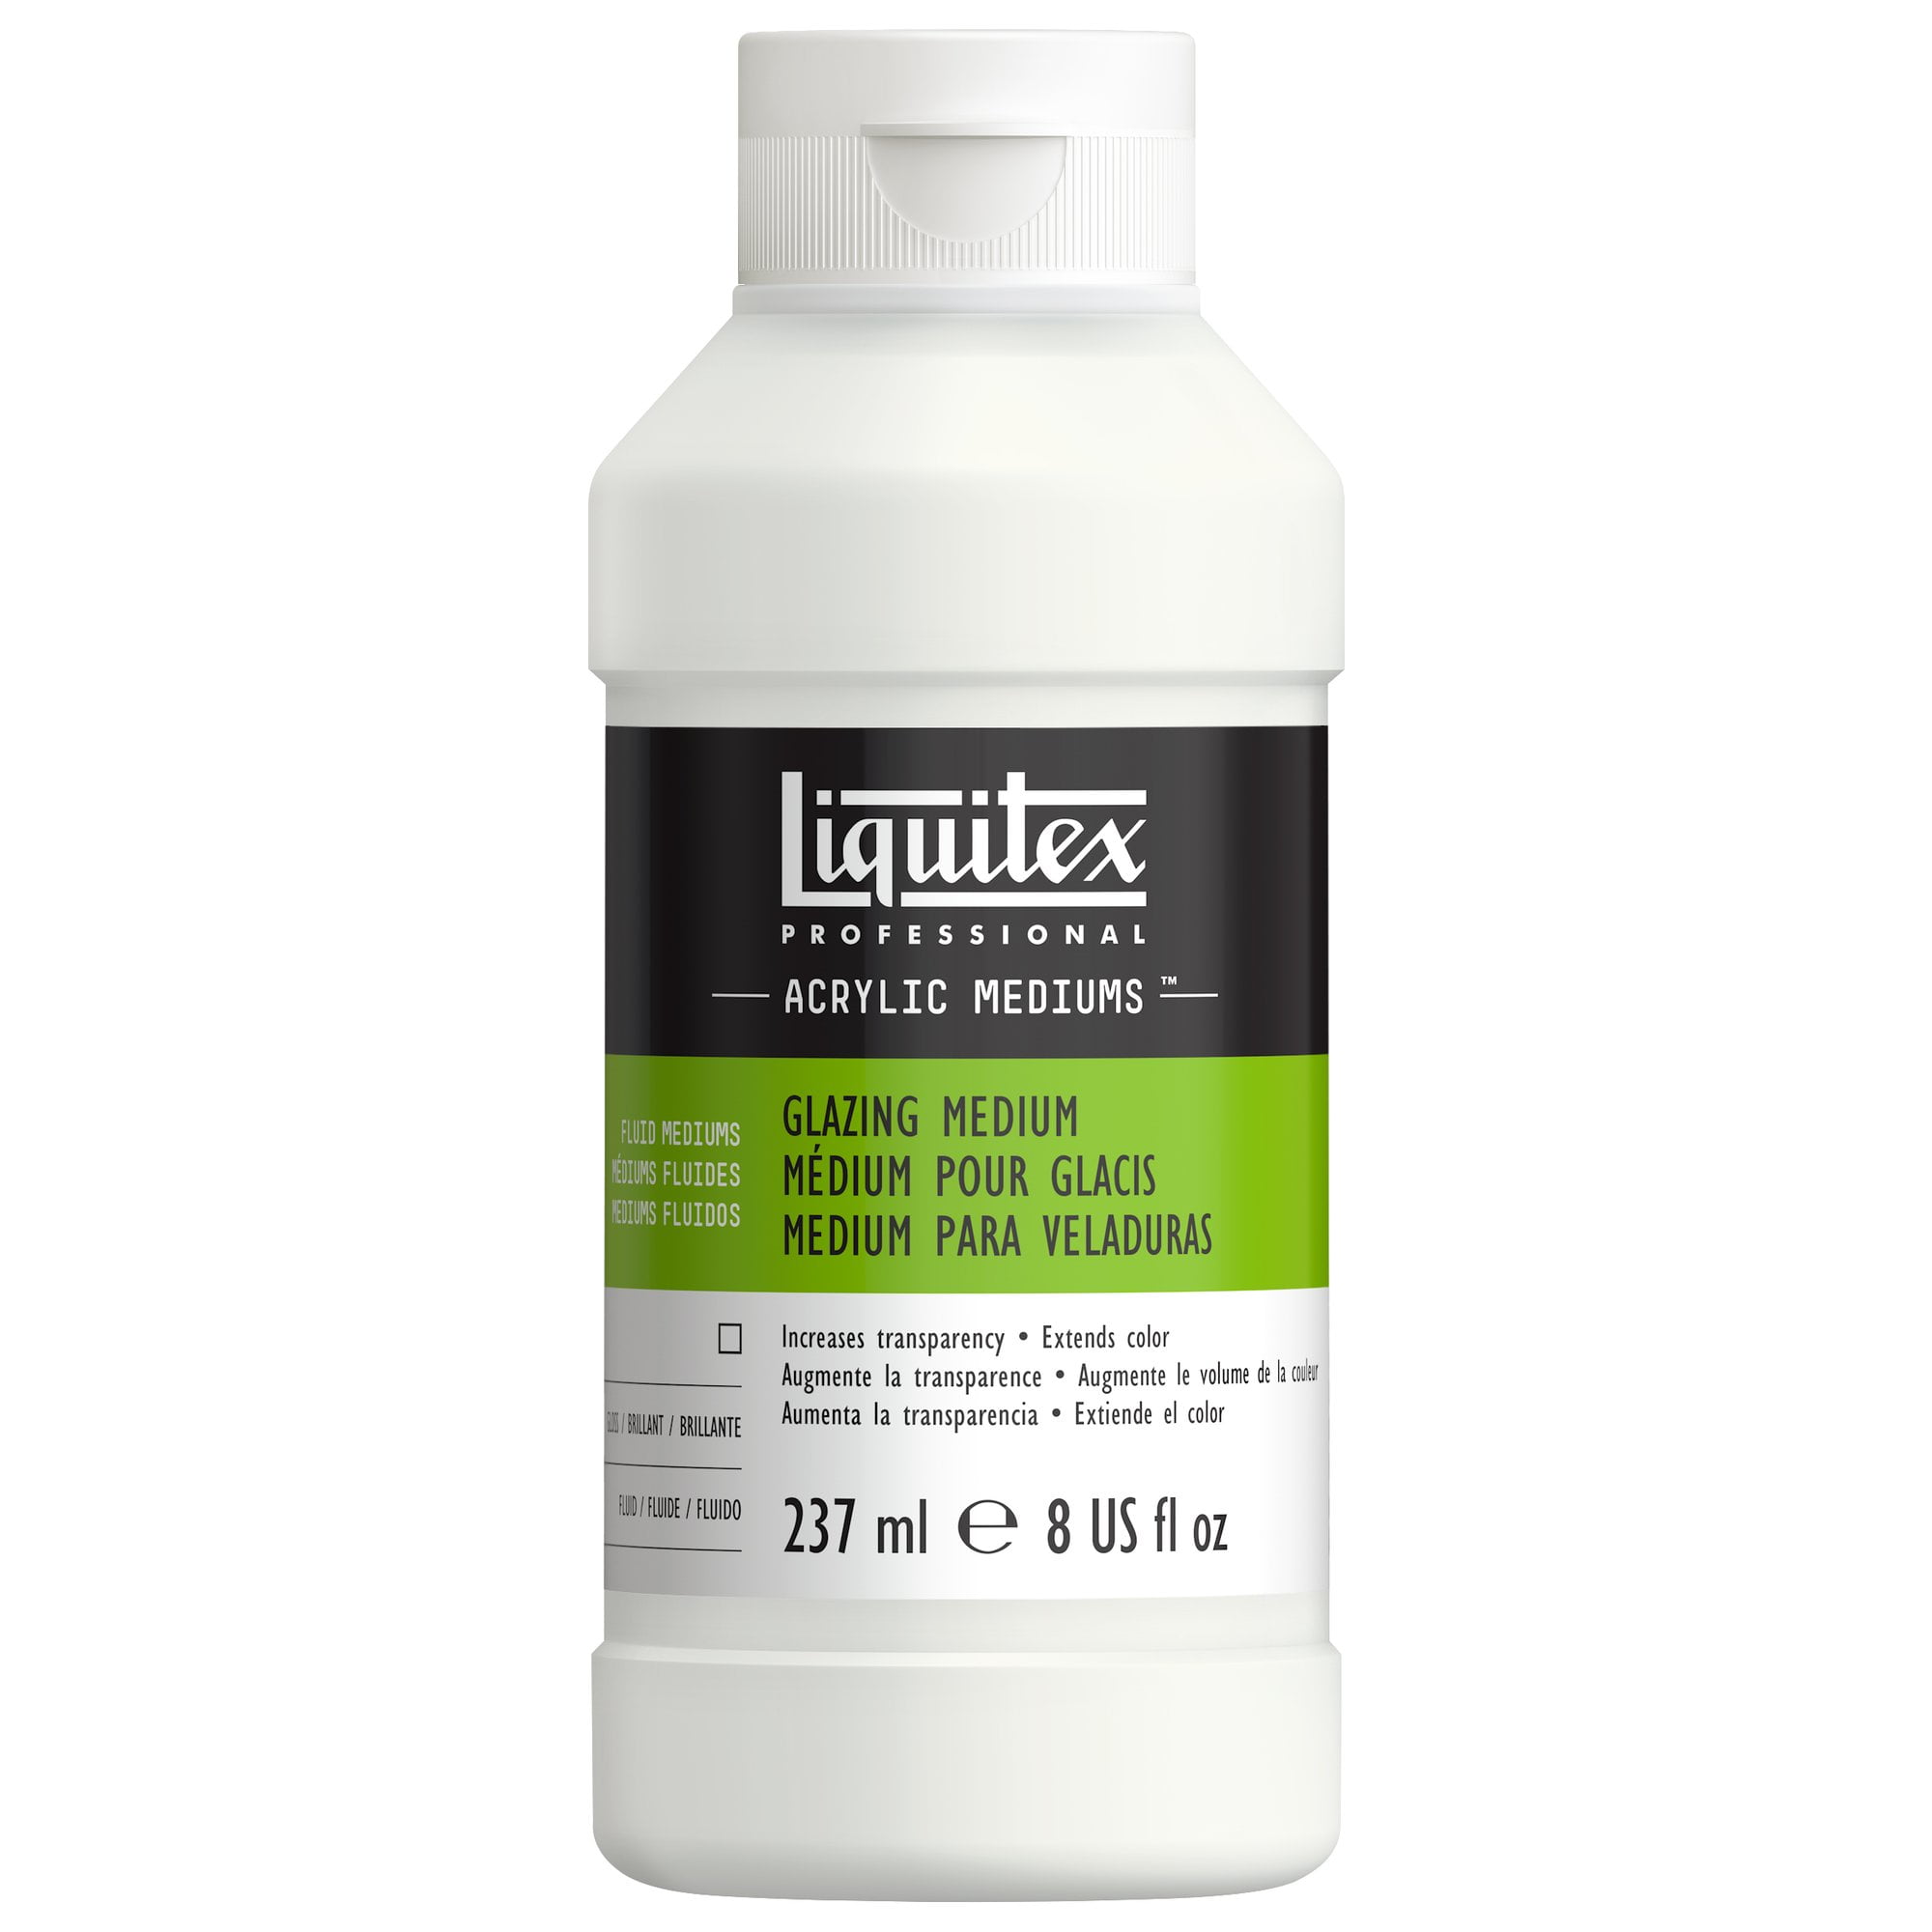 Lukas Artist Linseed Oil - Drying Retarder Binding Agent for Water Mixable  Oil Paints - 125 ml